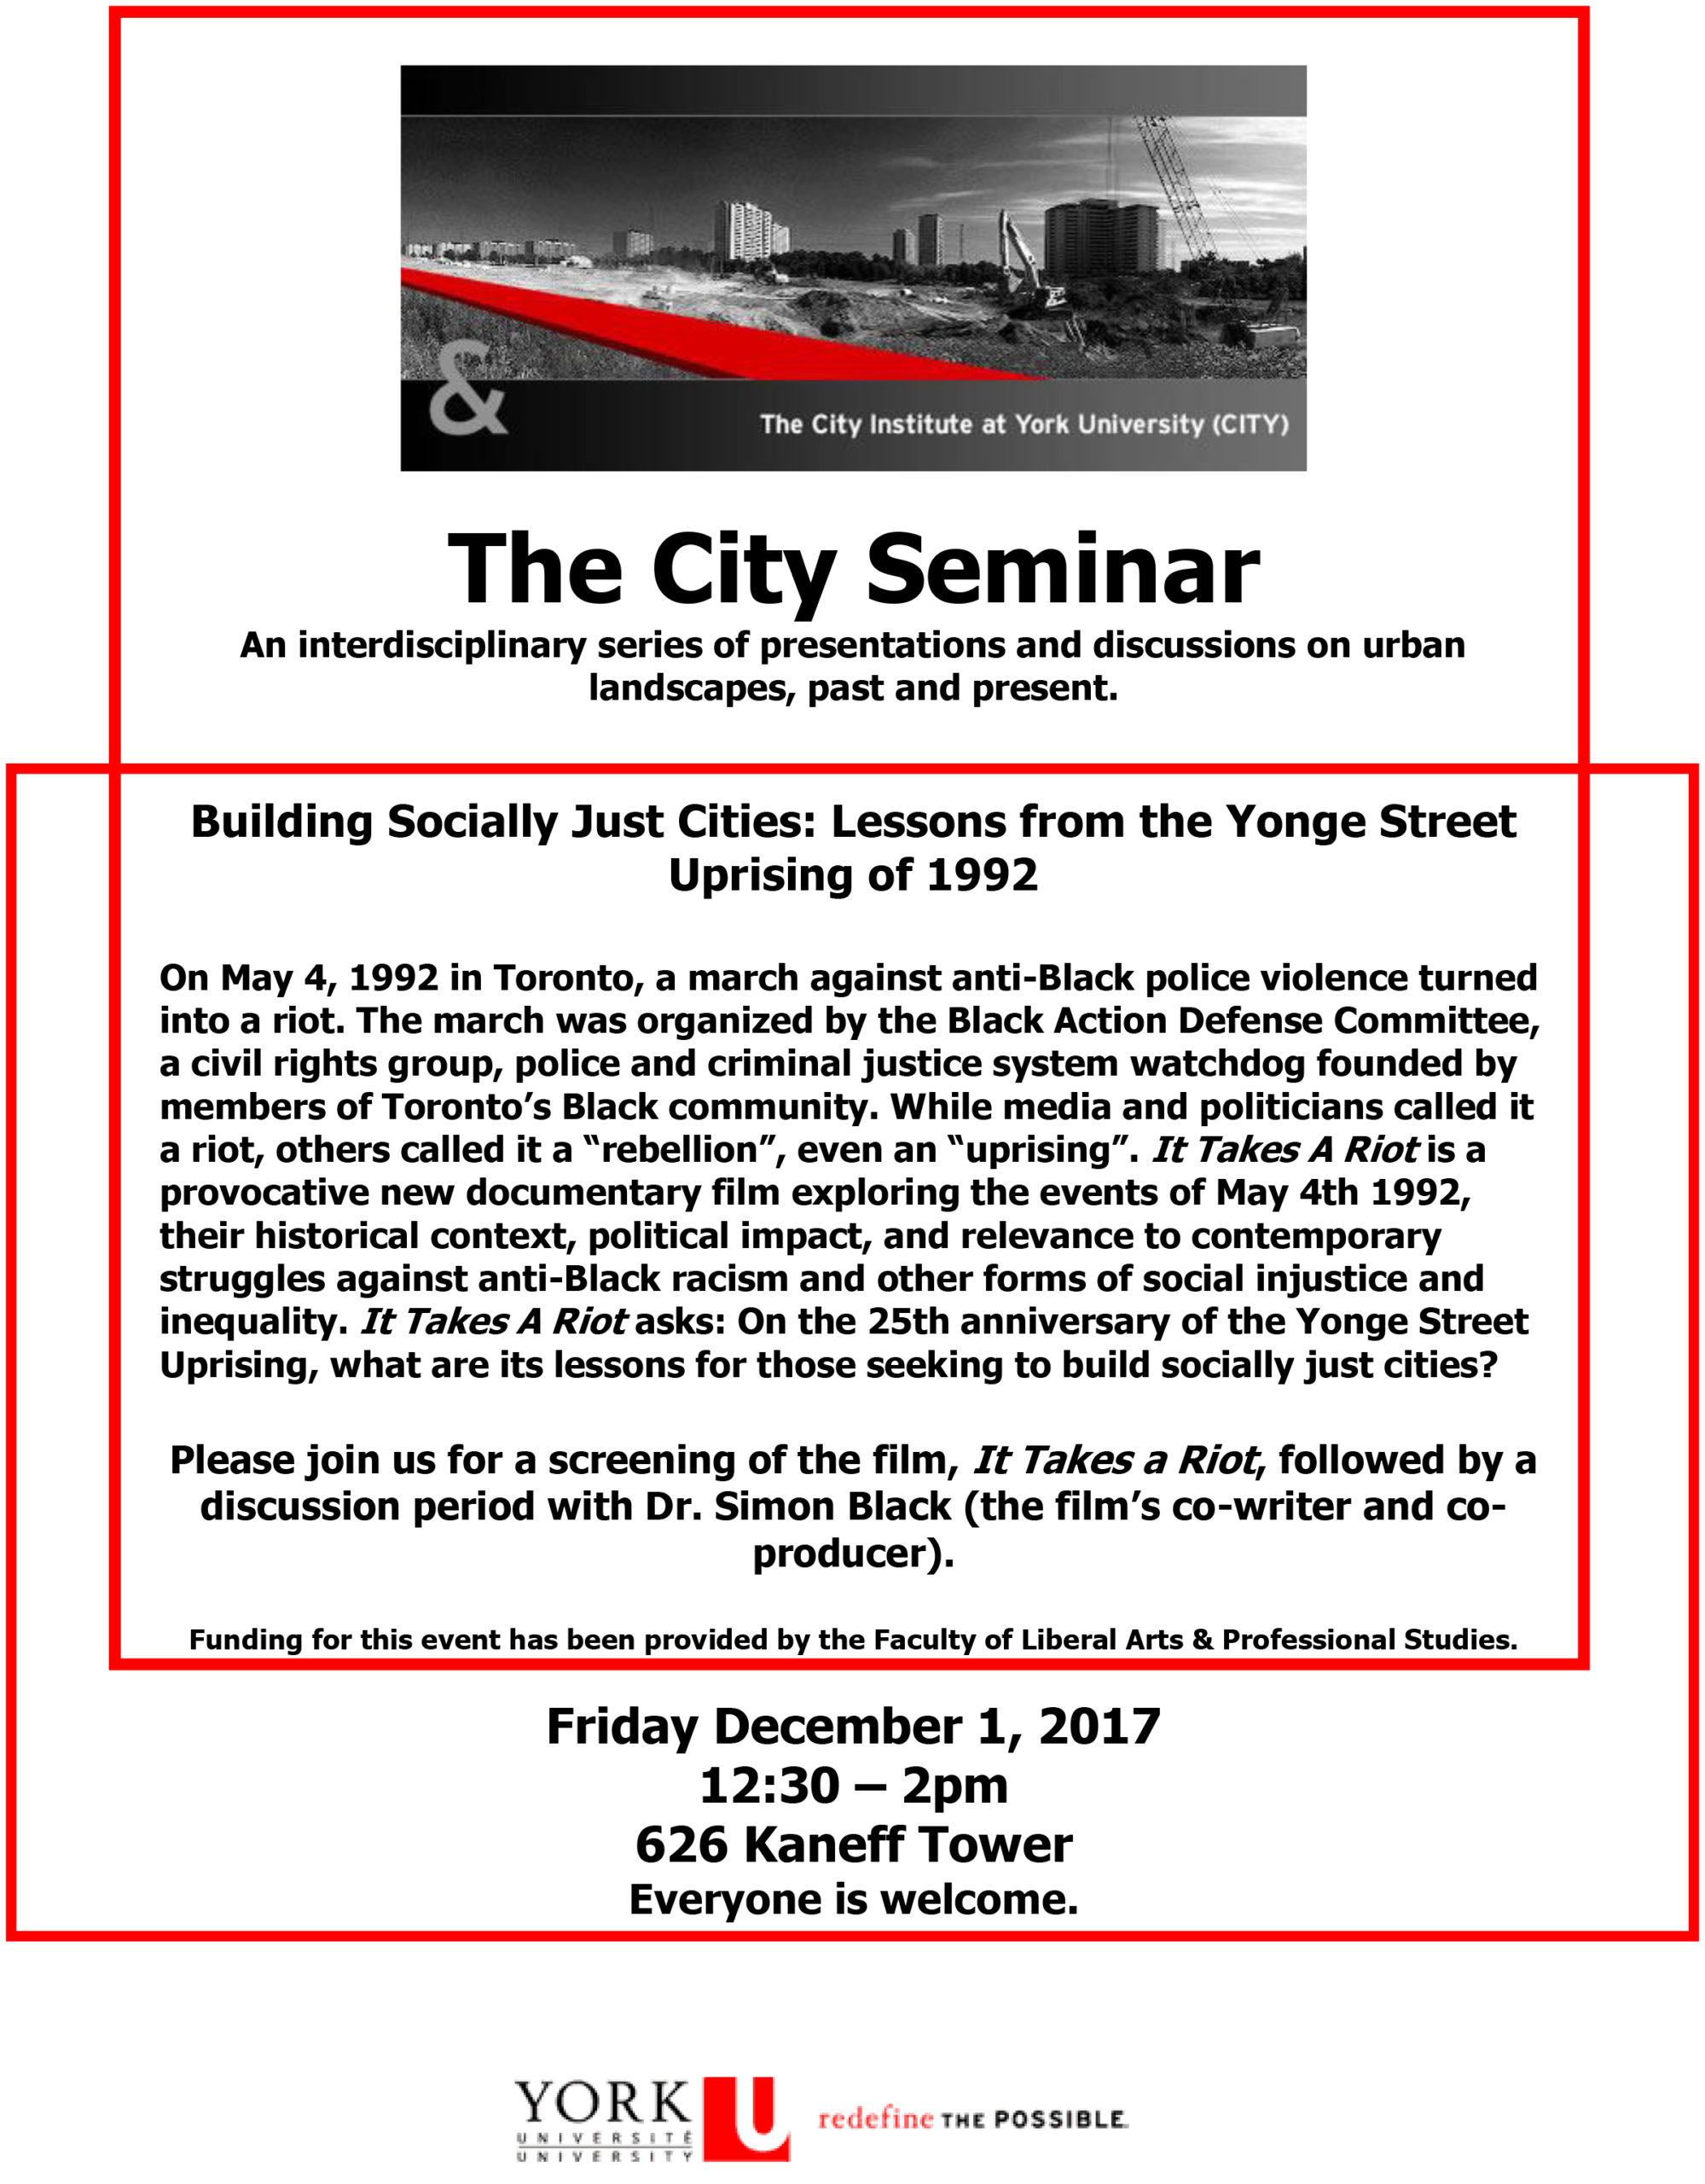 'Building Socially Just Cities: Lessons from the Yonge Street Uprising of 1992', with event description and venue details.